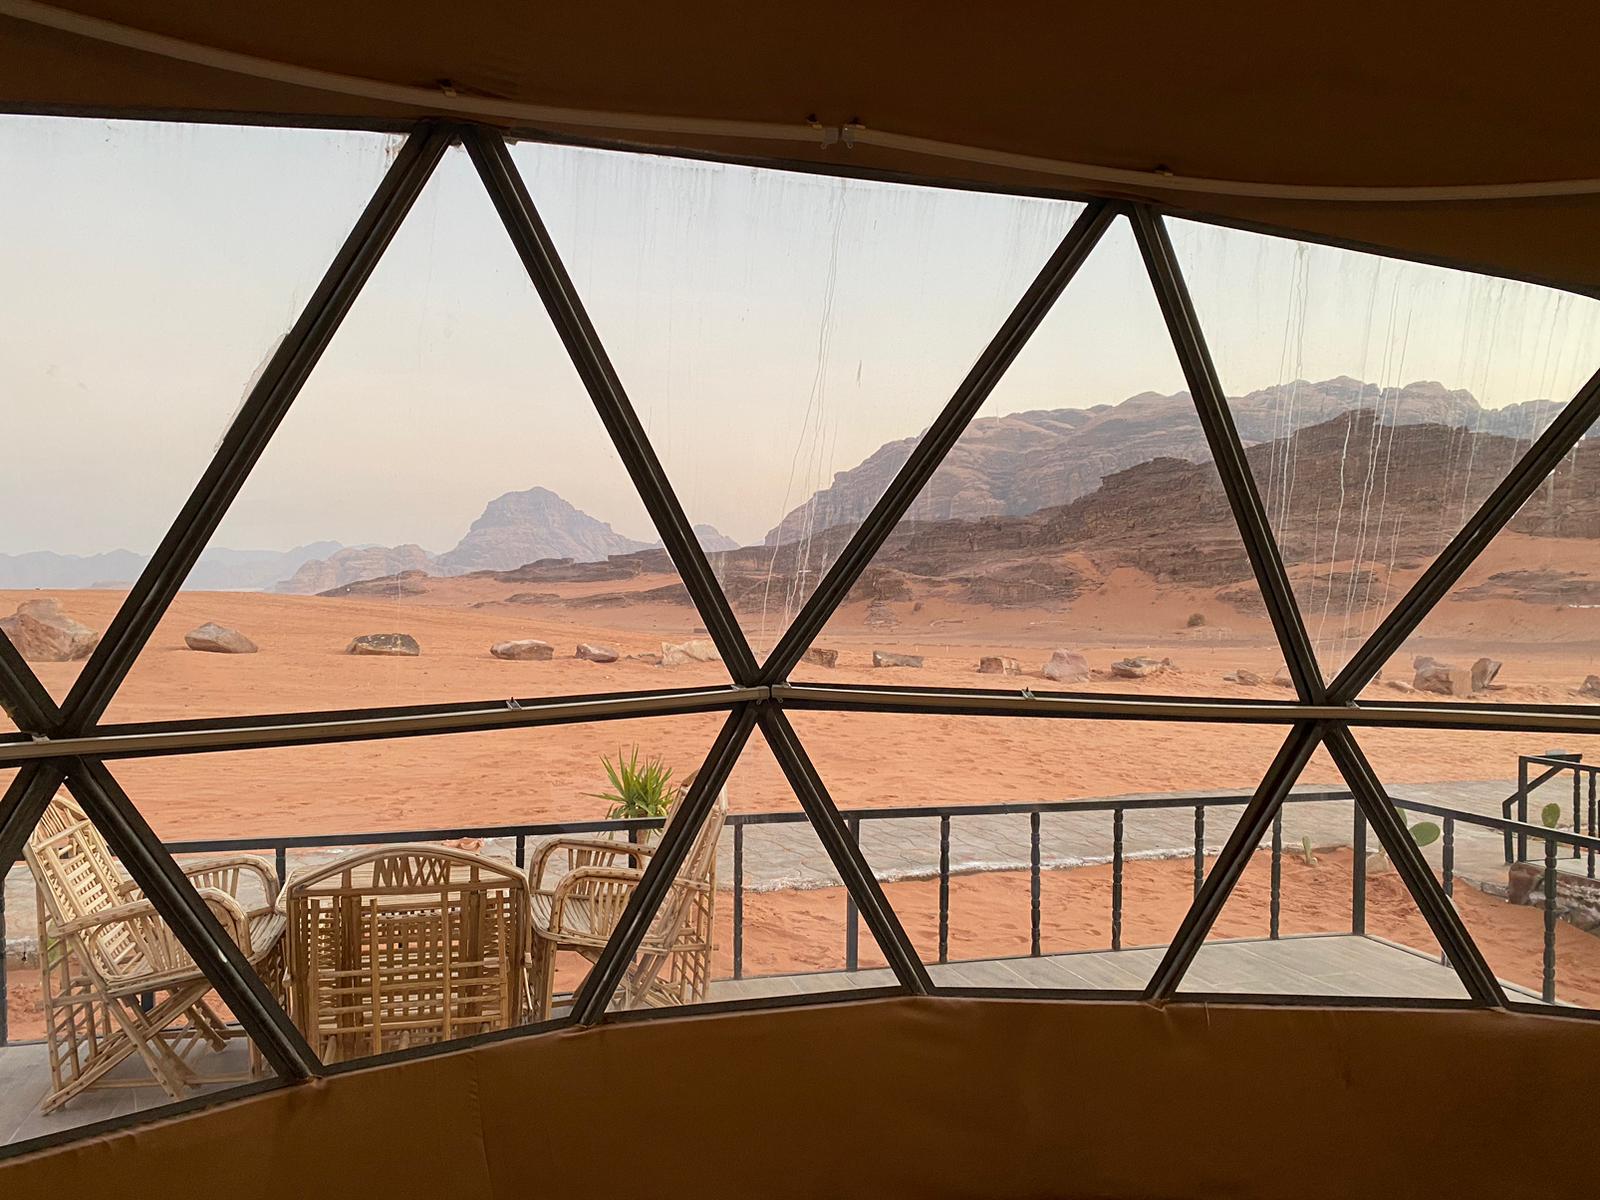 Wadi Rum Camping- The view from a Bubble Tent